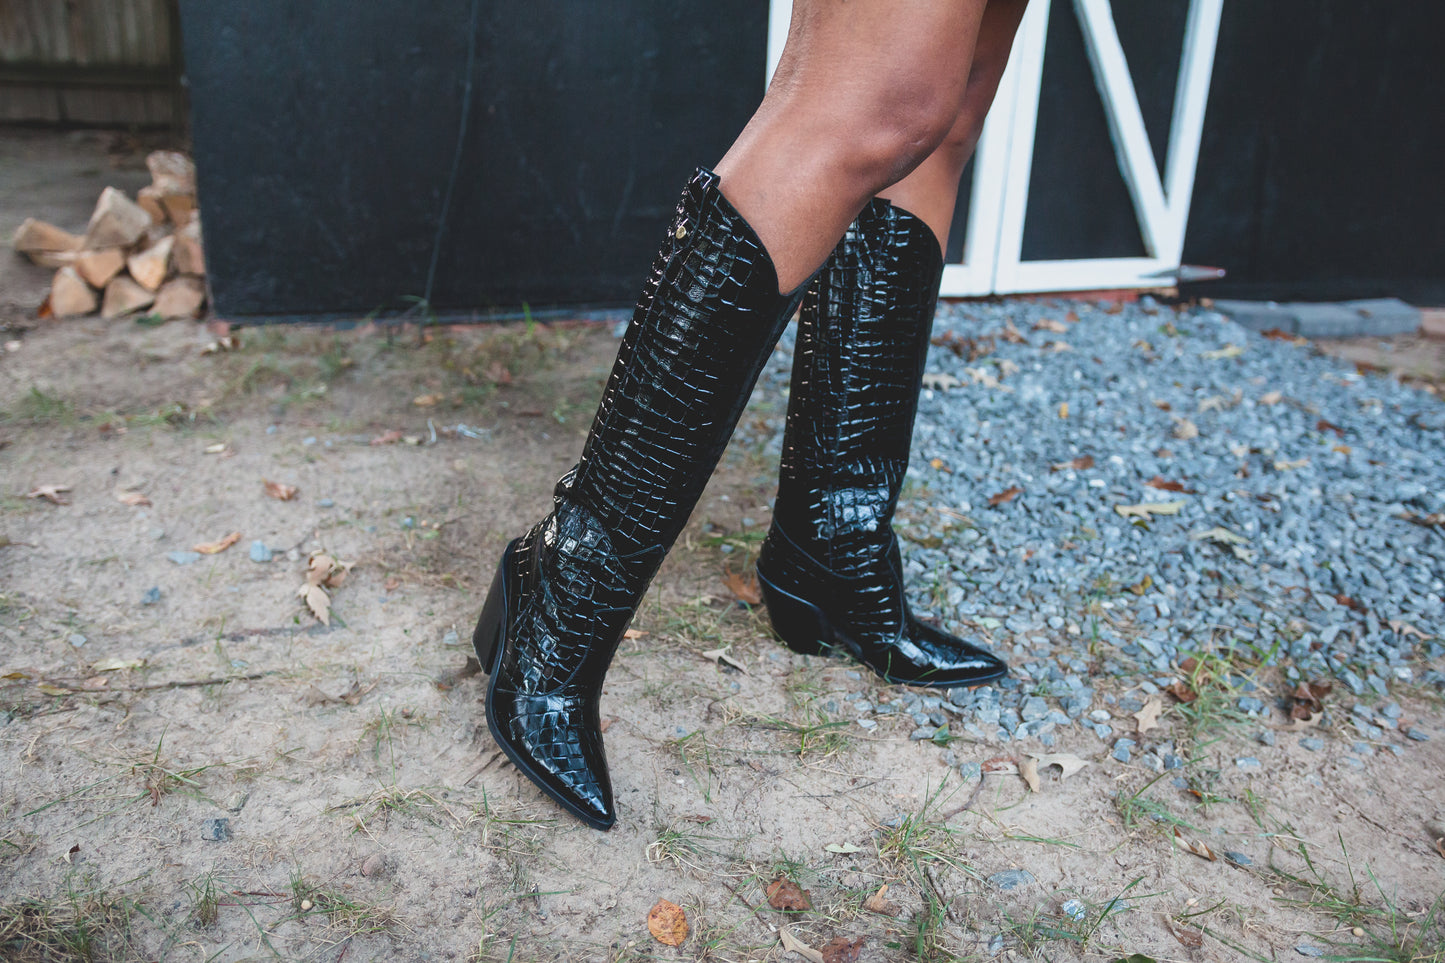 Macao boots - Black croc embossed cattle patent leather